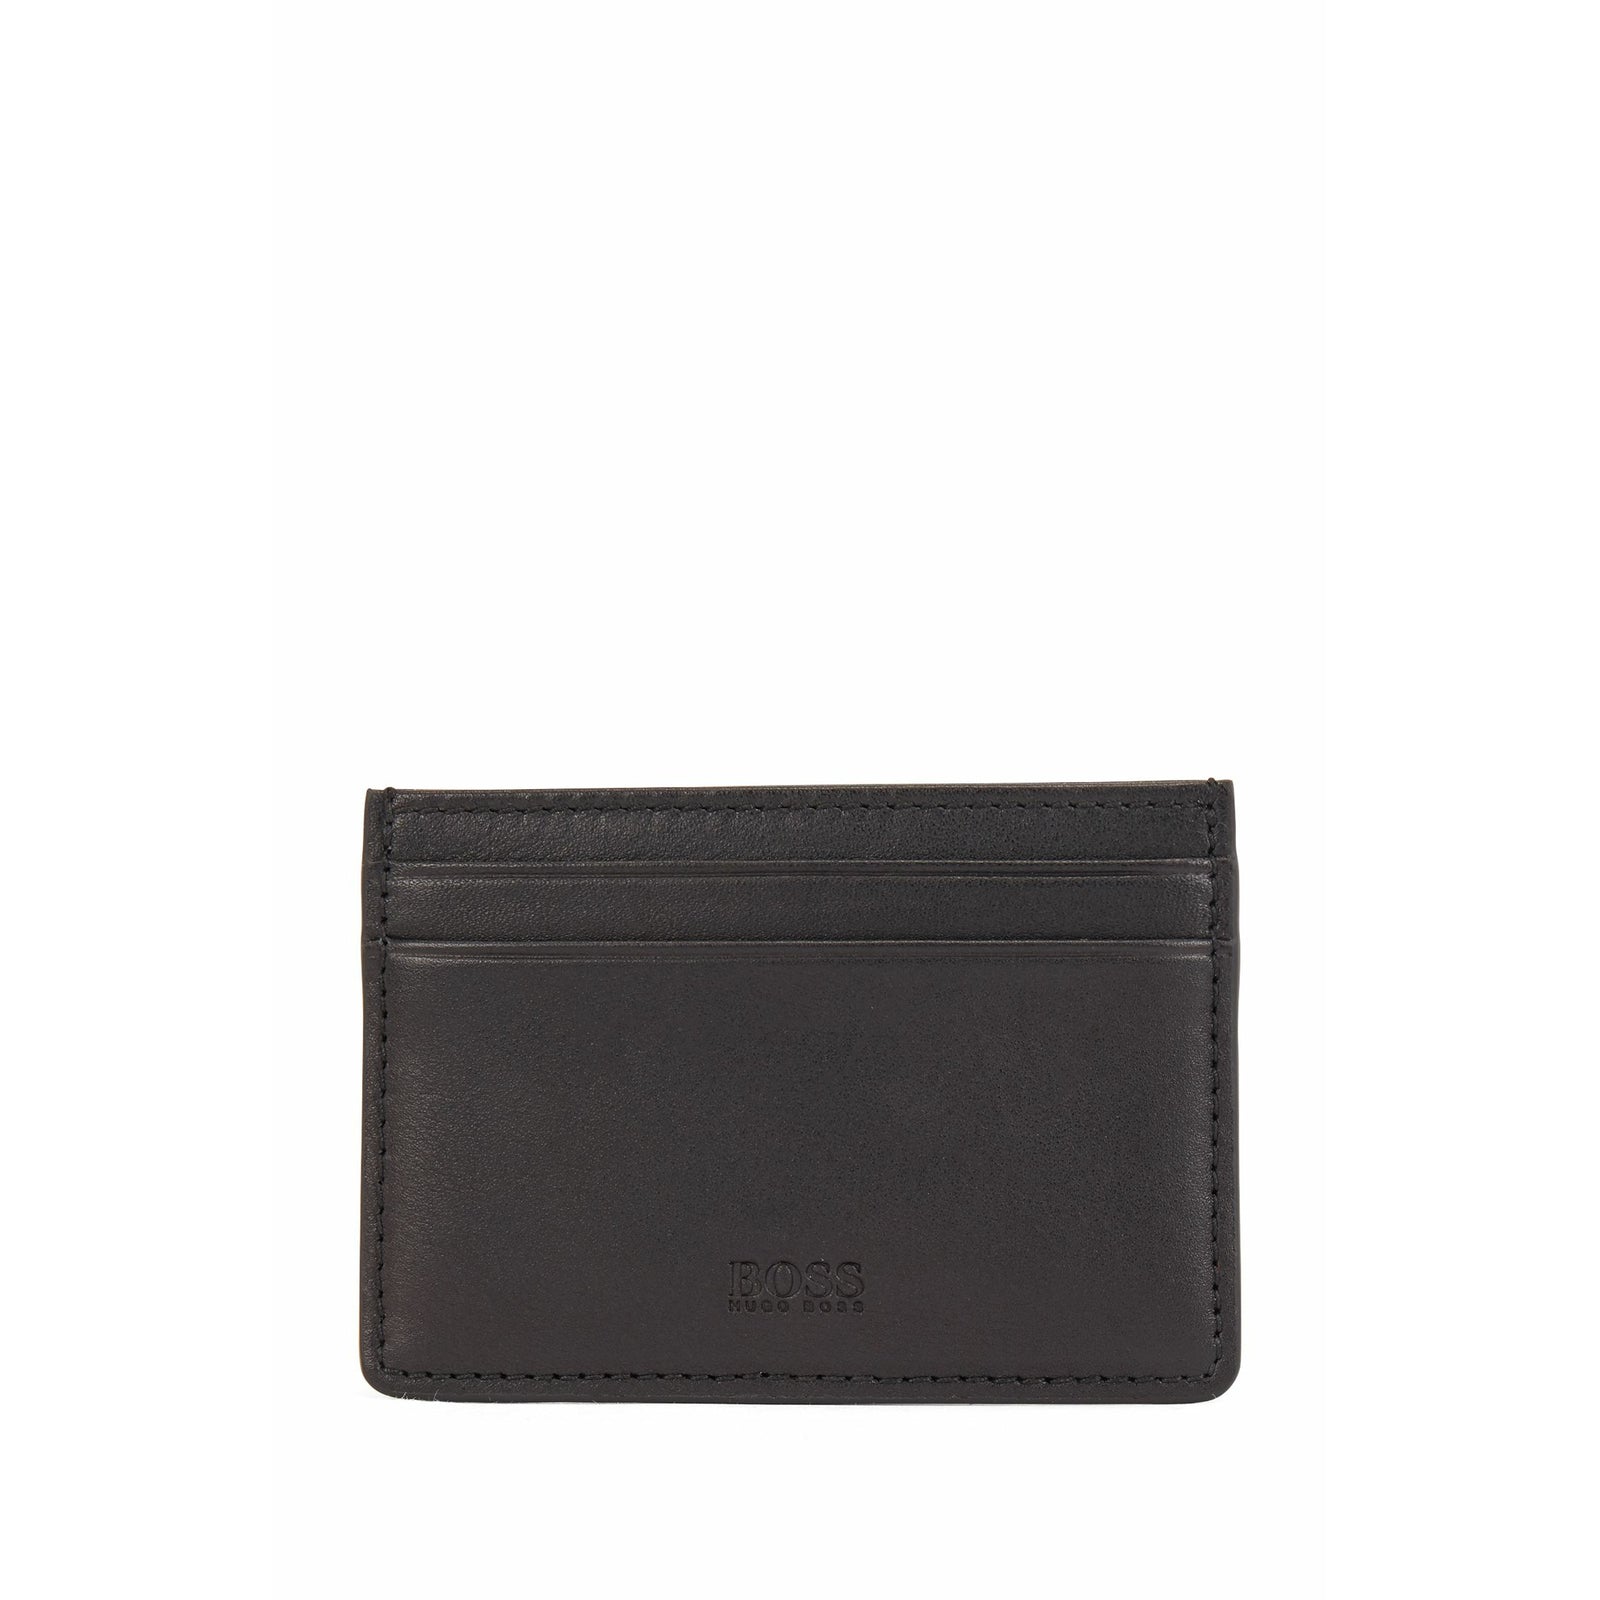 CARD HOLDER IN NAPPA LEATHER WITH BLIND-EMBOSSED LOGO
PERSONALIZATION AVAILABLE (CONTACT THE  SELLER VIA THE CHAT) - Yooto